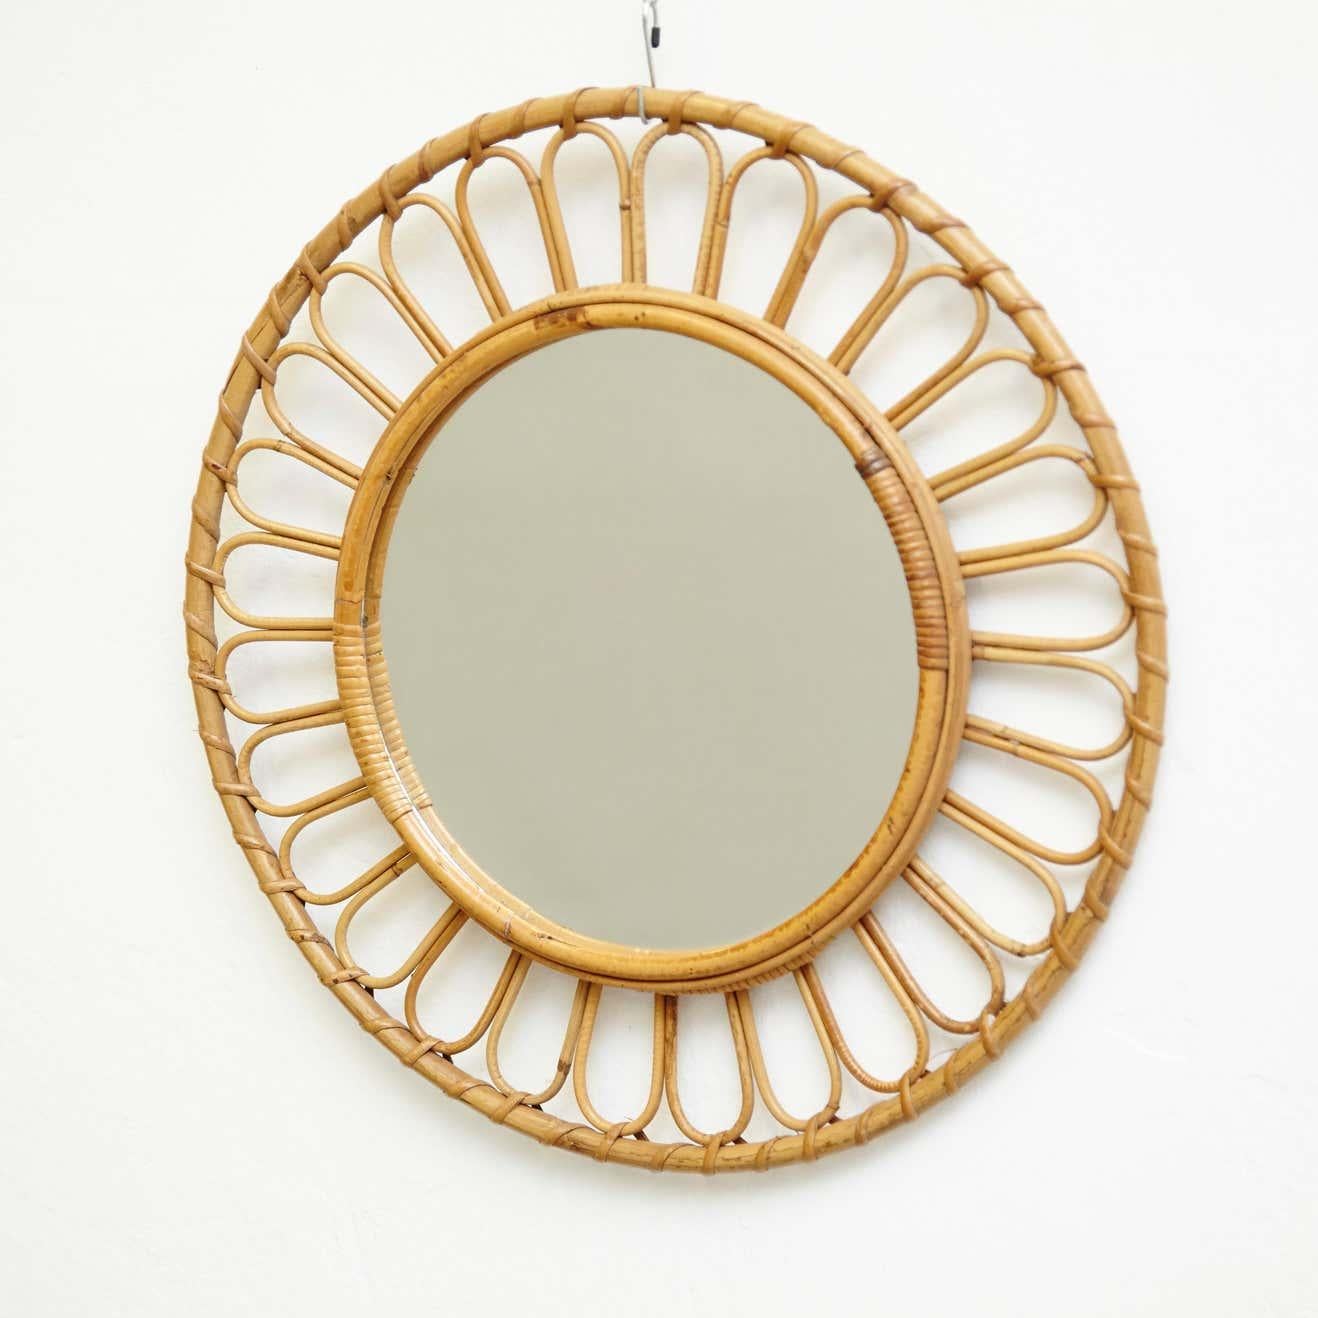 Mid-Century Modern French handcrafted rattan wall mirror.
By unknown artisan, circa 1960.
In original condition, with minor wear consistent with age and use, preserving a beautiful patina.

Materials:
Mirror
Handcrafted rattan